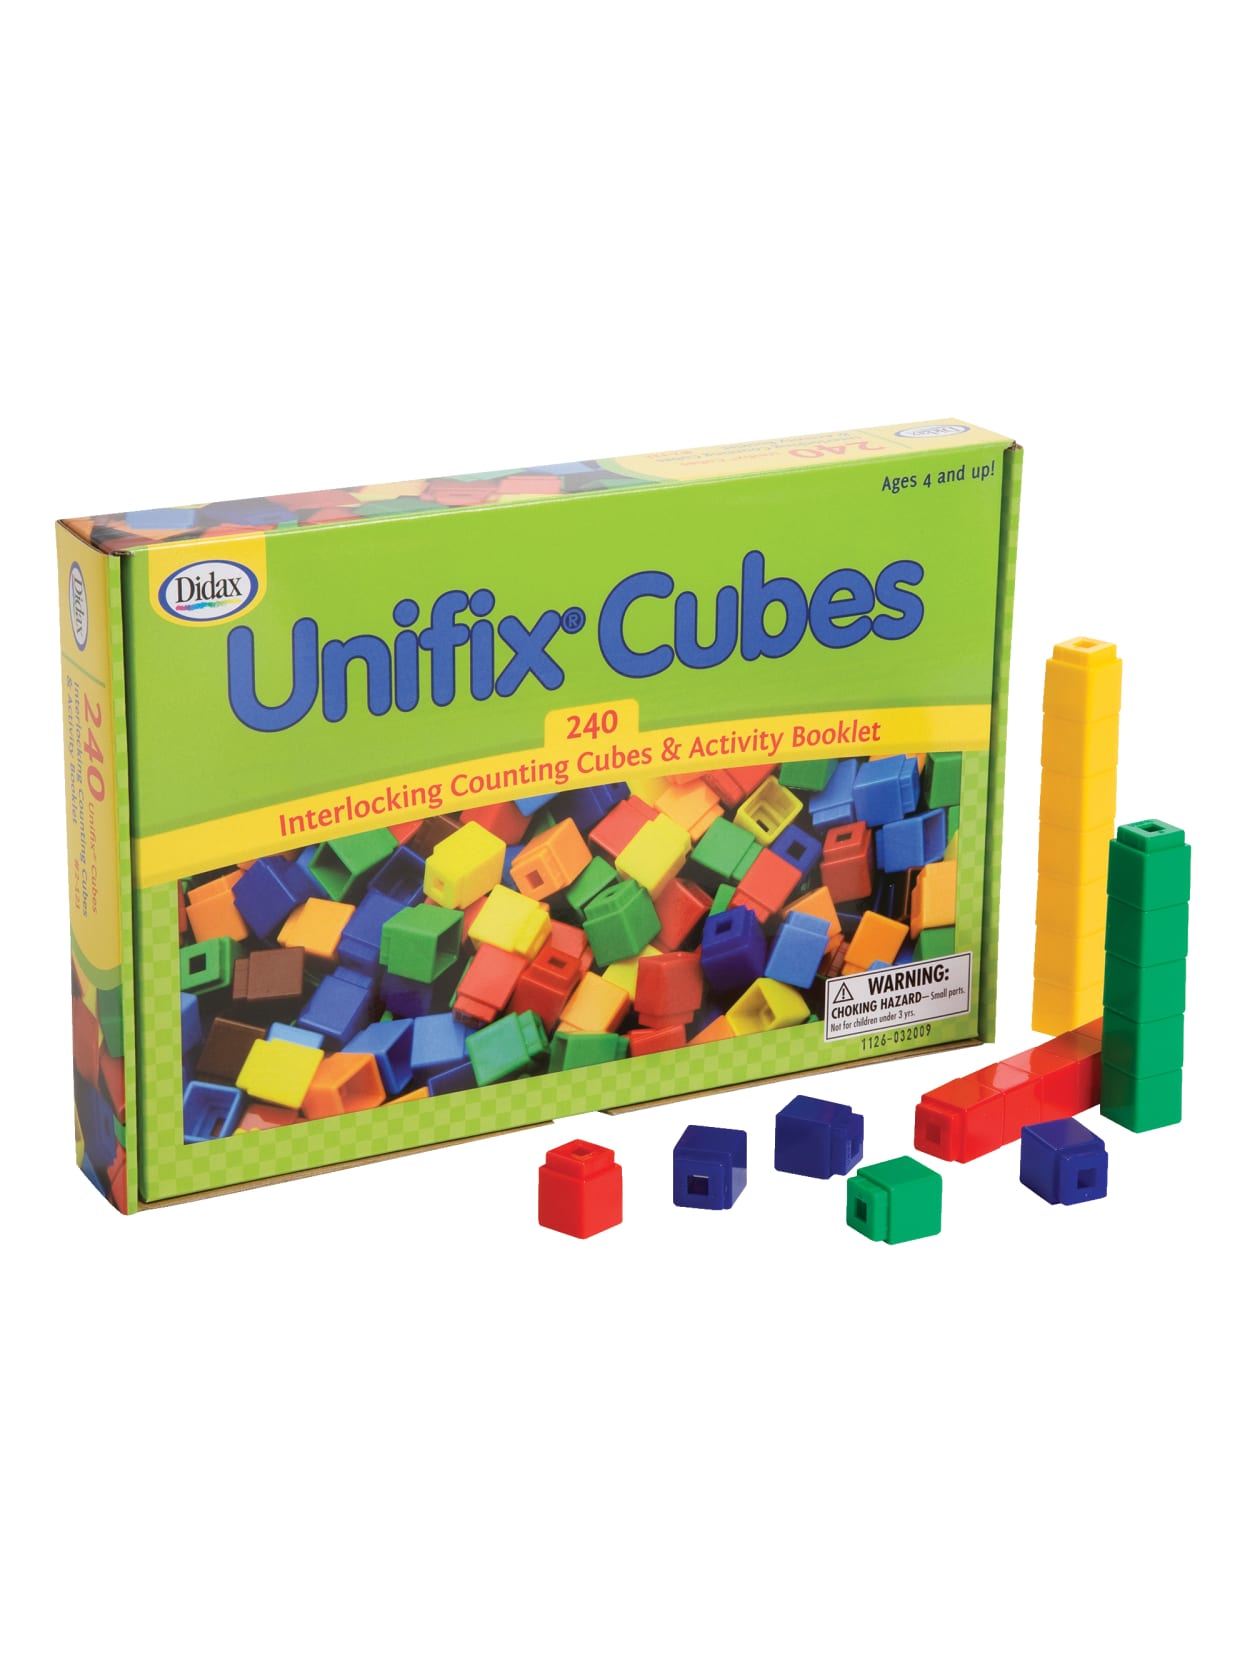 Didax Unifix Cubes For Pattern Building Multicolor Pack Of 240 Office Depot